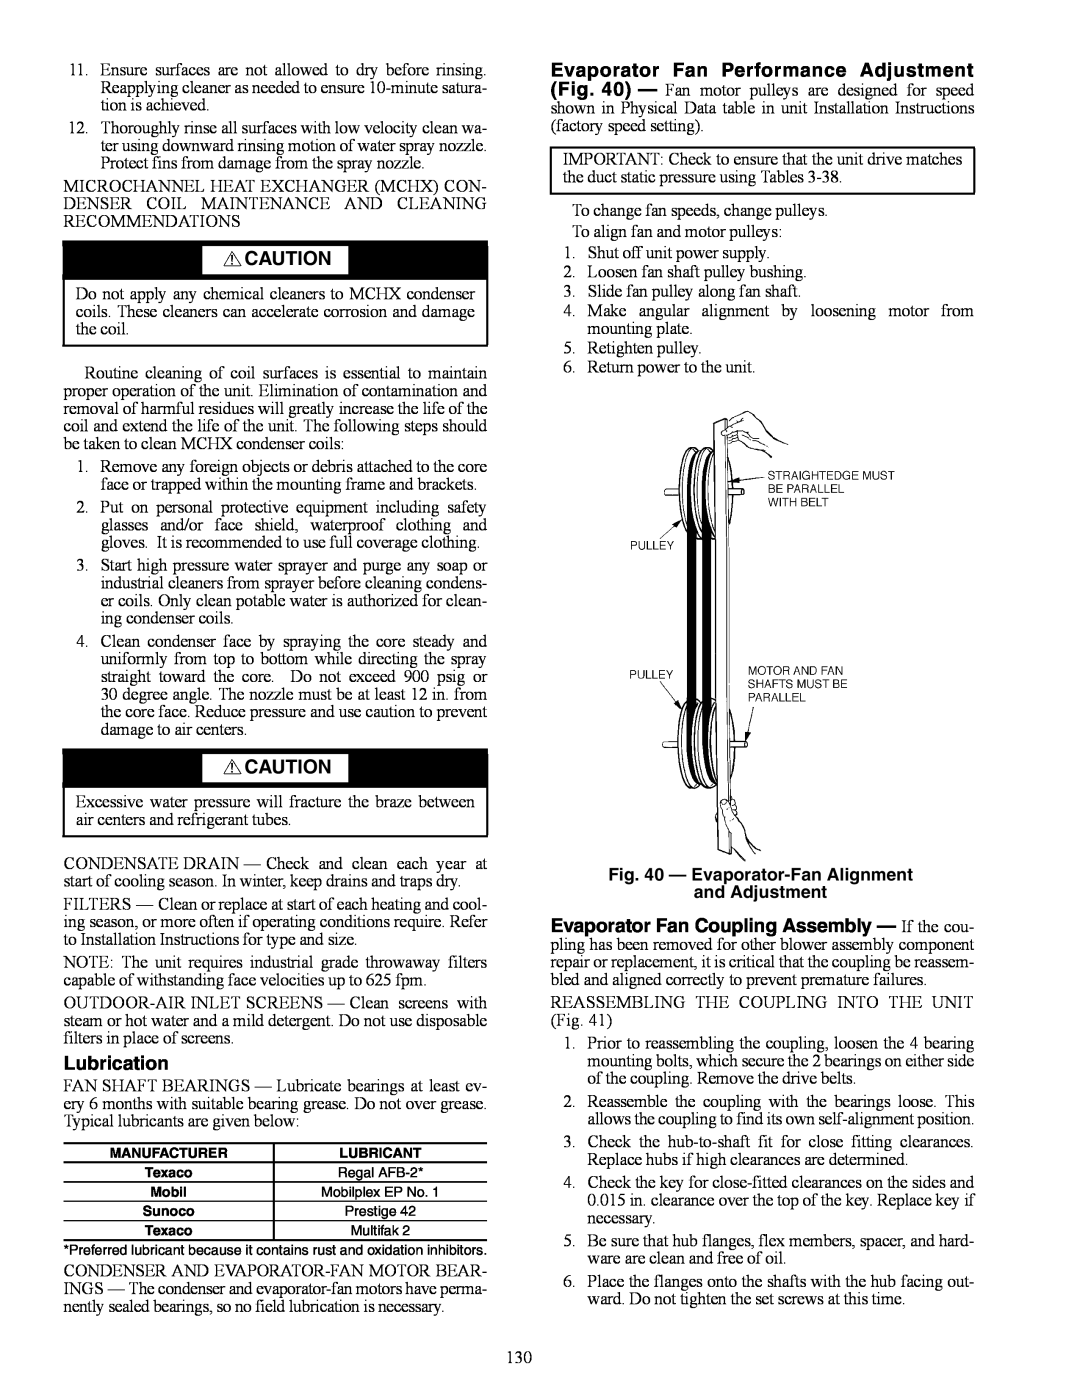 Carrier 48/50AJ specifications Lubrication, Evaporator-FanAlignment and Adjustment 